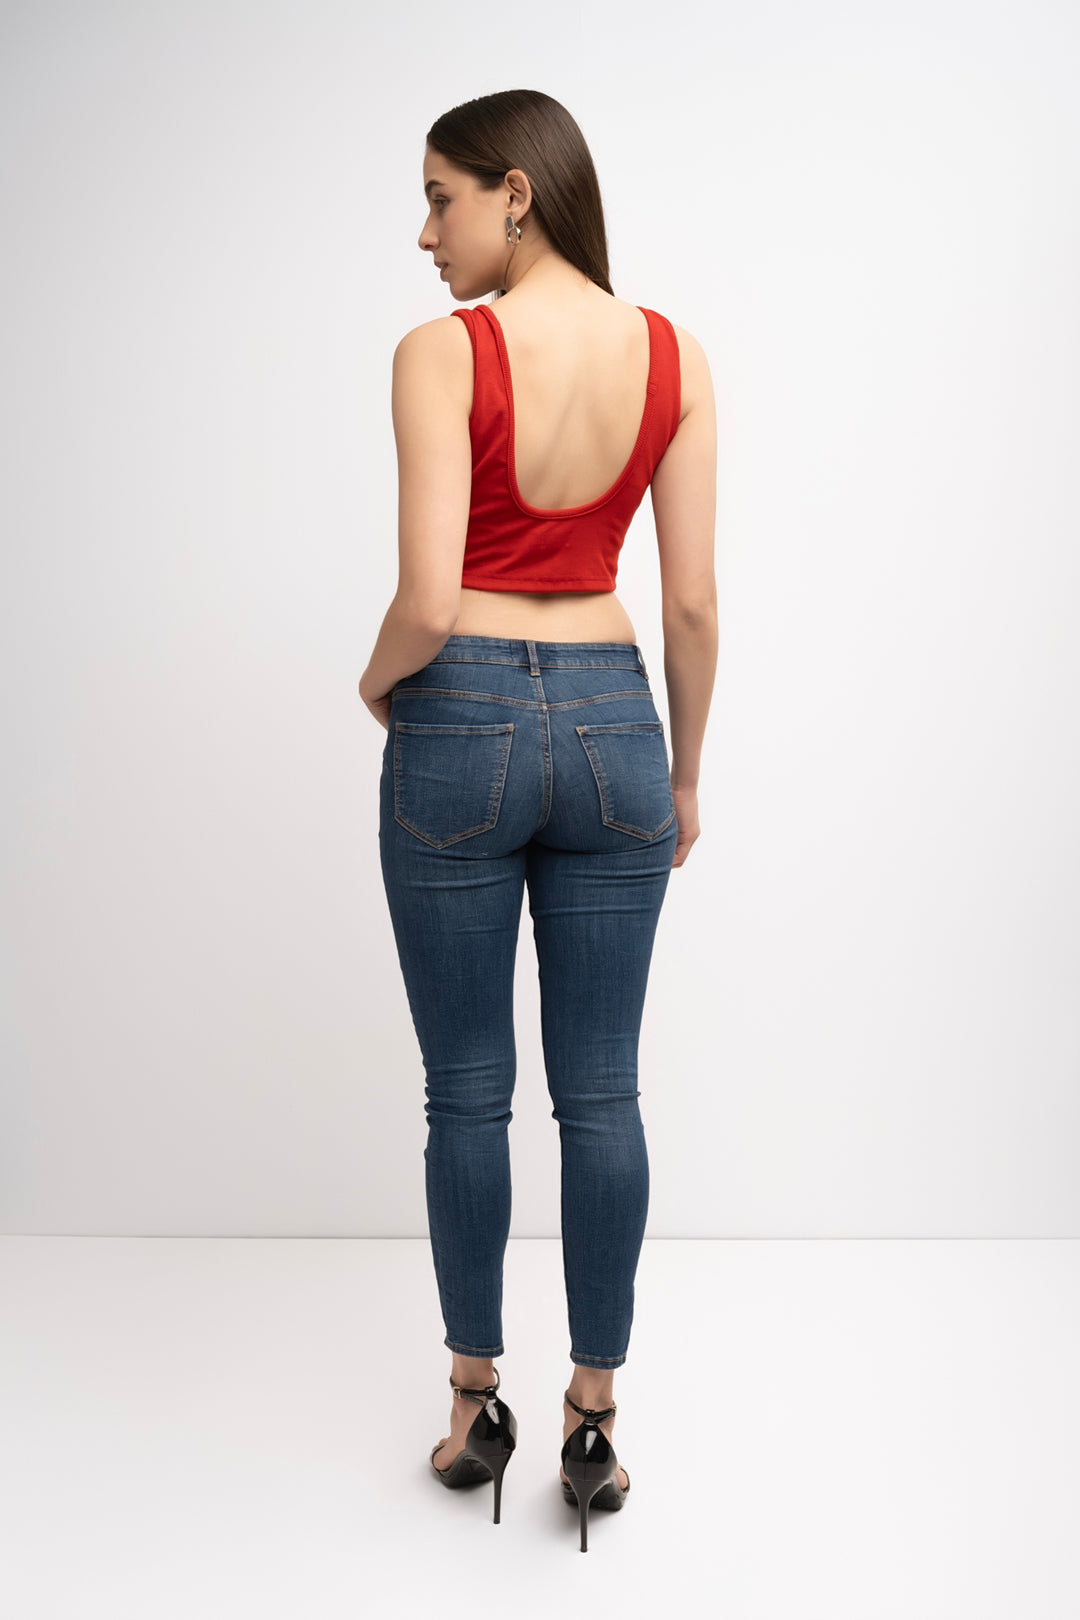 Zykaz Signature Solid Crop Top Backless